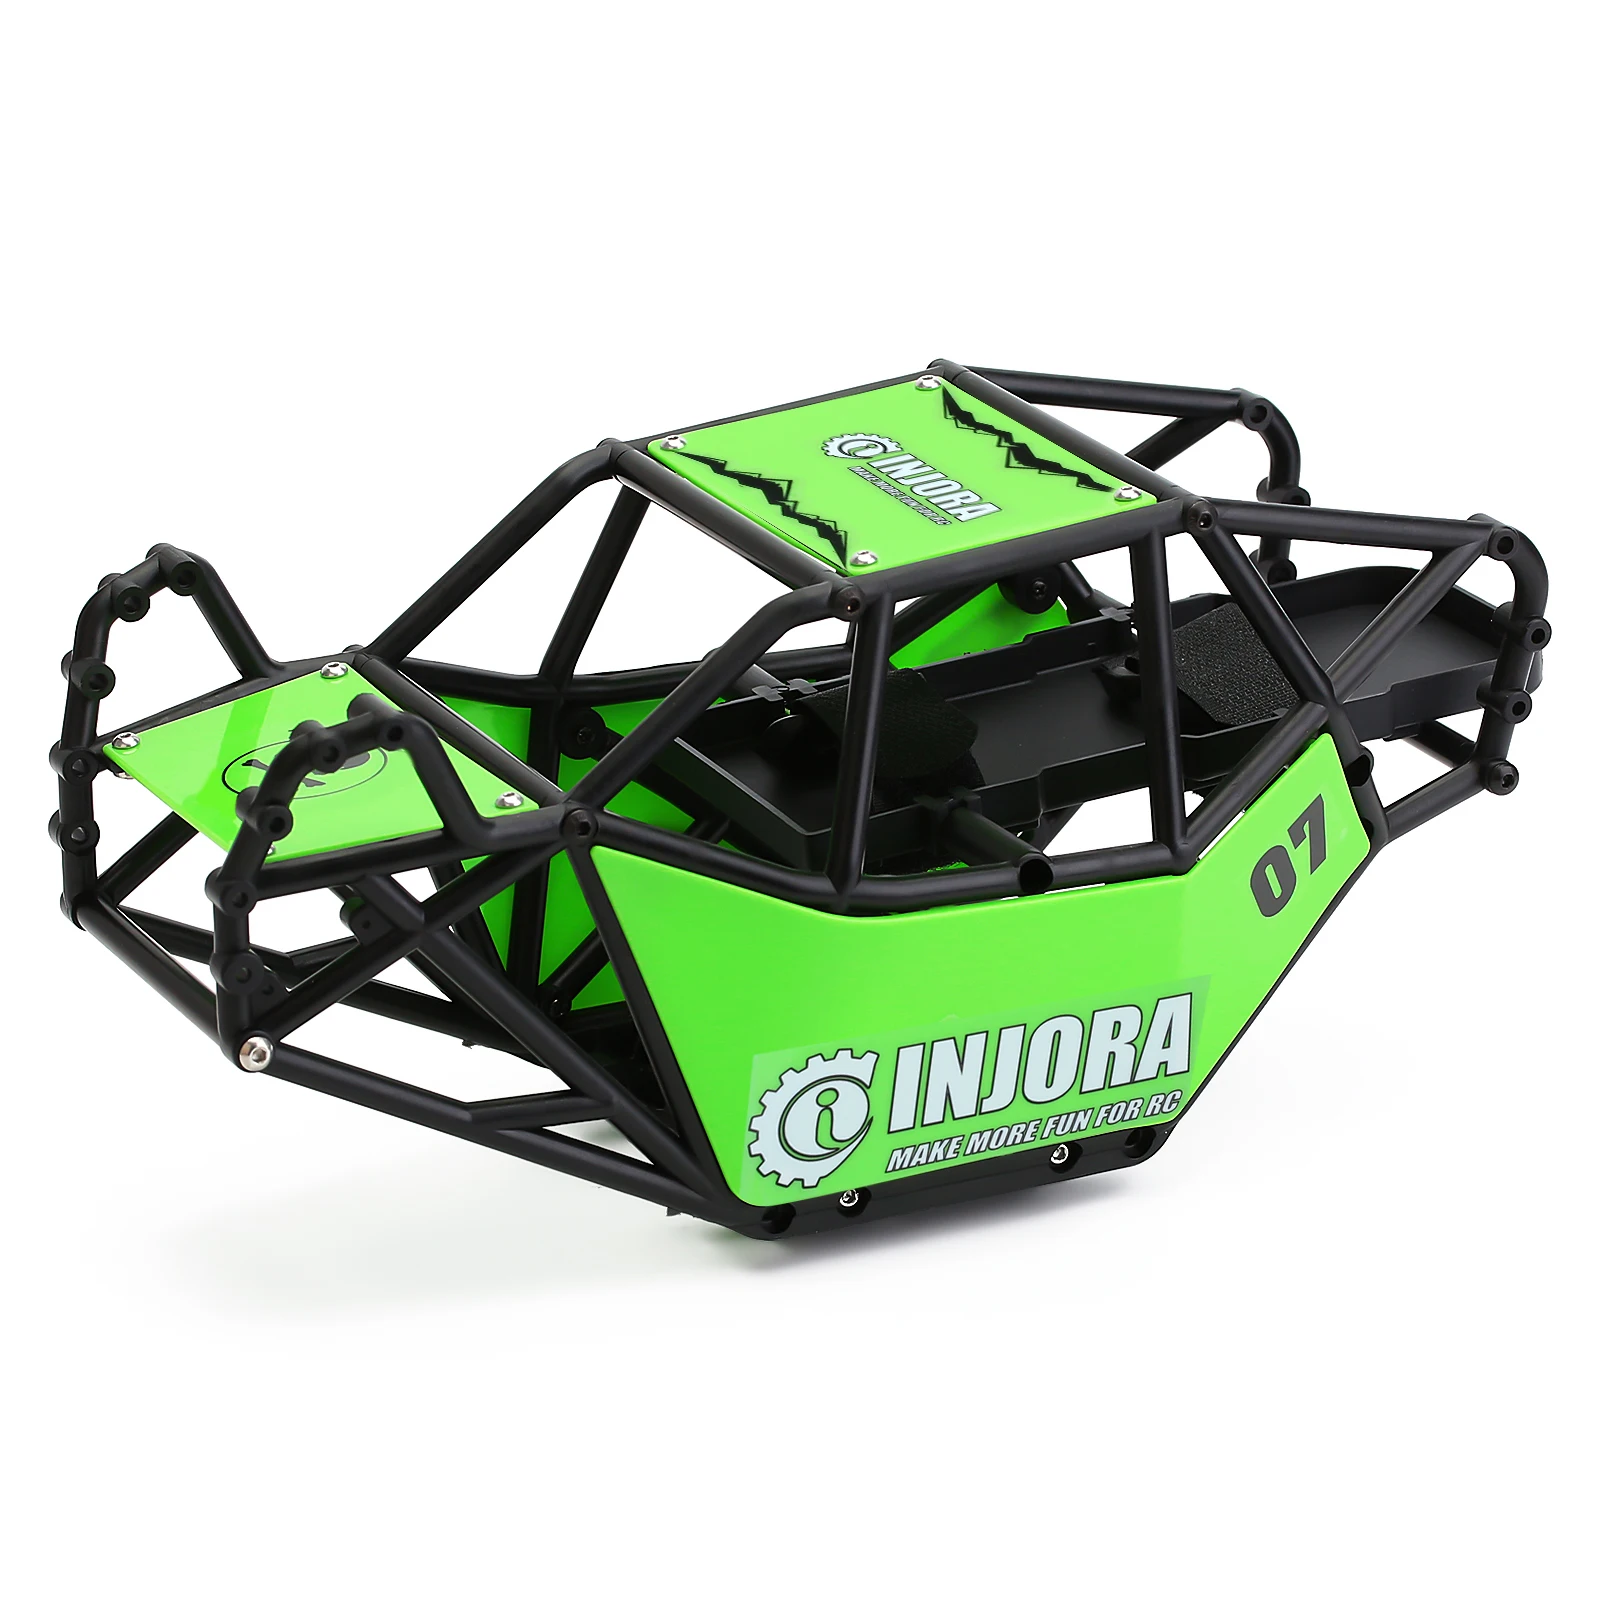 Nylon Buggy Body Shell Roll Cage Chassis for 1/10 Scale RC Crawler Axial SCX10 90046 Upgrade Parts